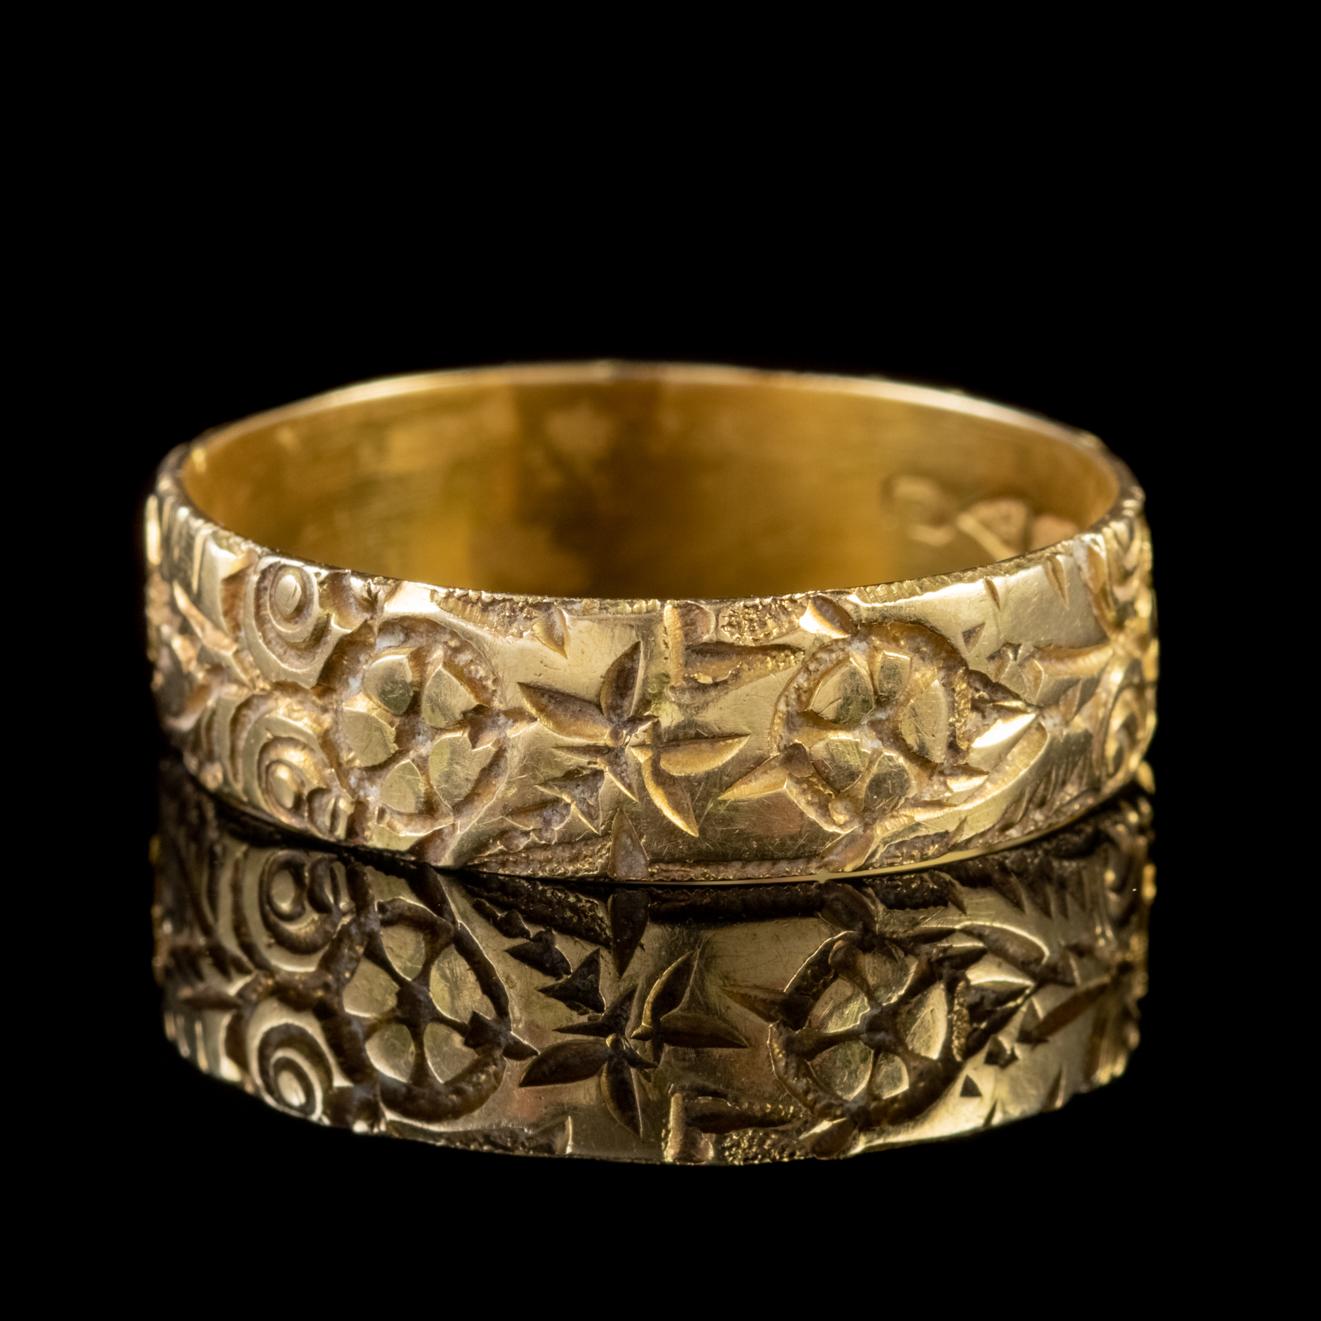 A grand Antique Edwardian band ring modelled in solid 18ct Yellow Gold and engraved with detailed Forget me nots which encircle the band in a lovely decorative fashion. 

Forget me nots in an old German tale were discovered by two lovers walking by